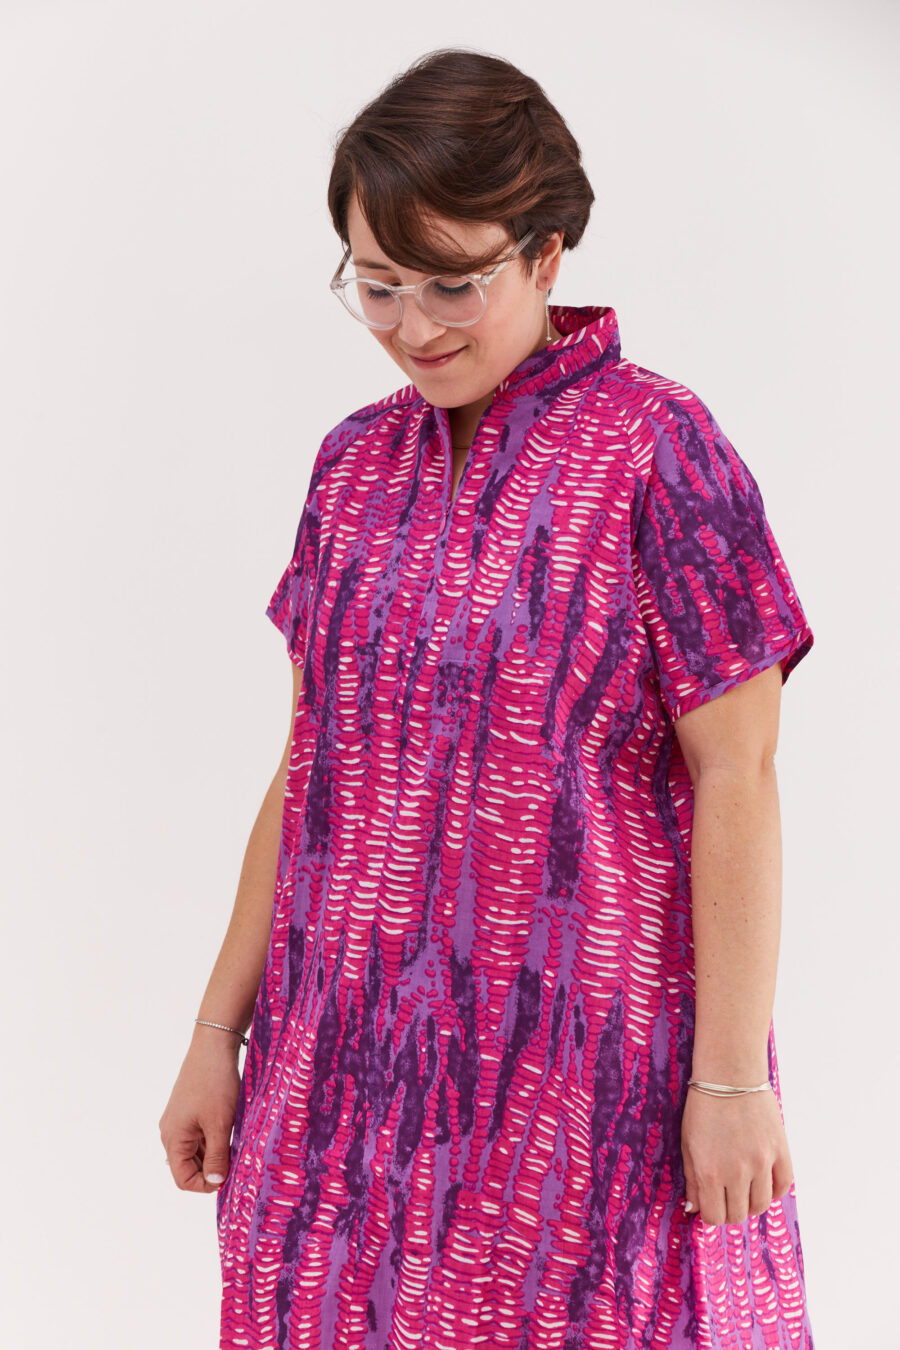 Maiko dress | Japanese dress with a unique high collar – Stone violet print, pink dress with violet stone-like print by comfort zone boutique